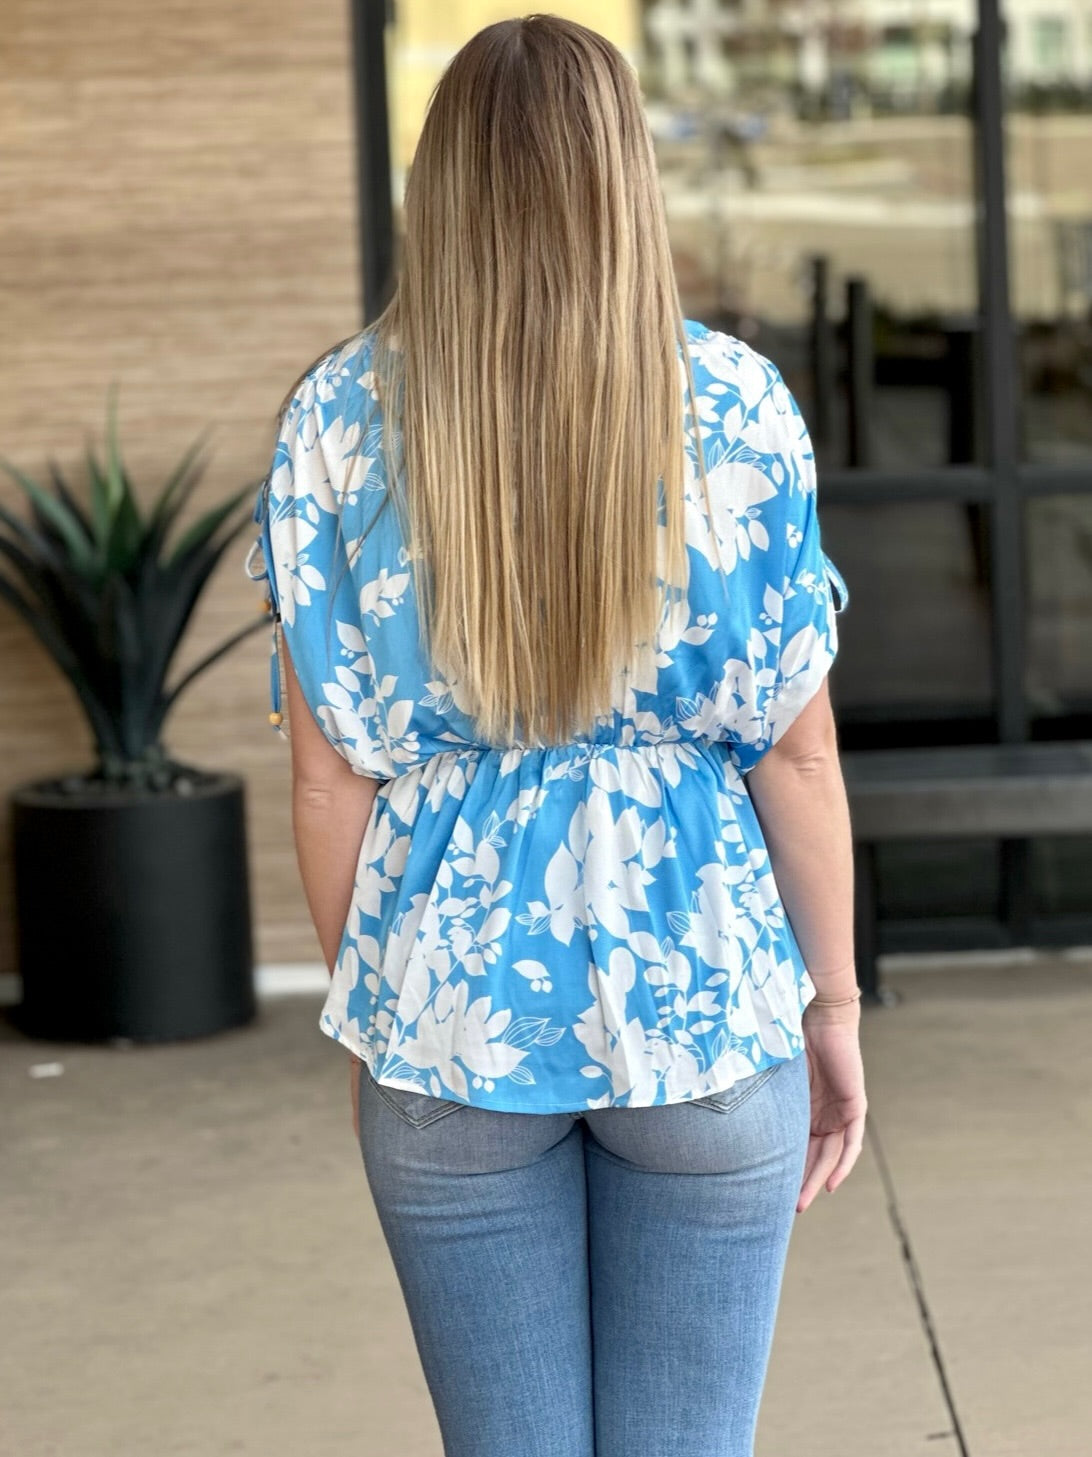 lexie in floral top back view